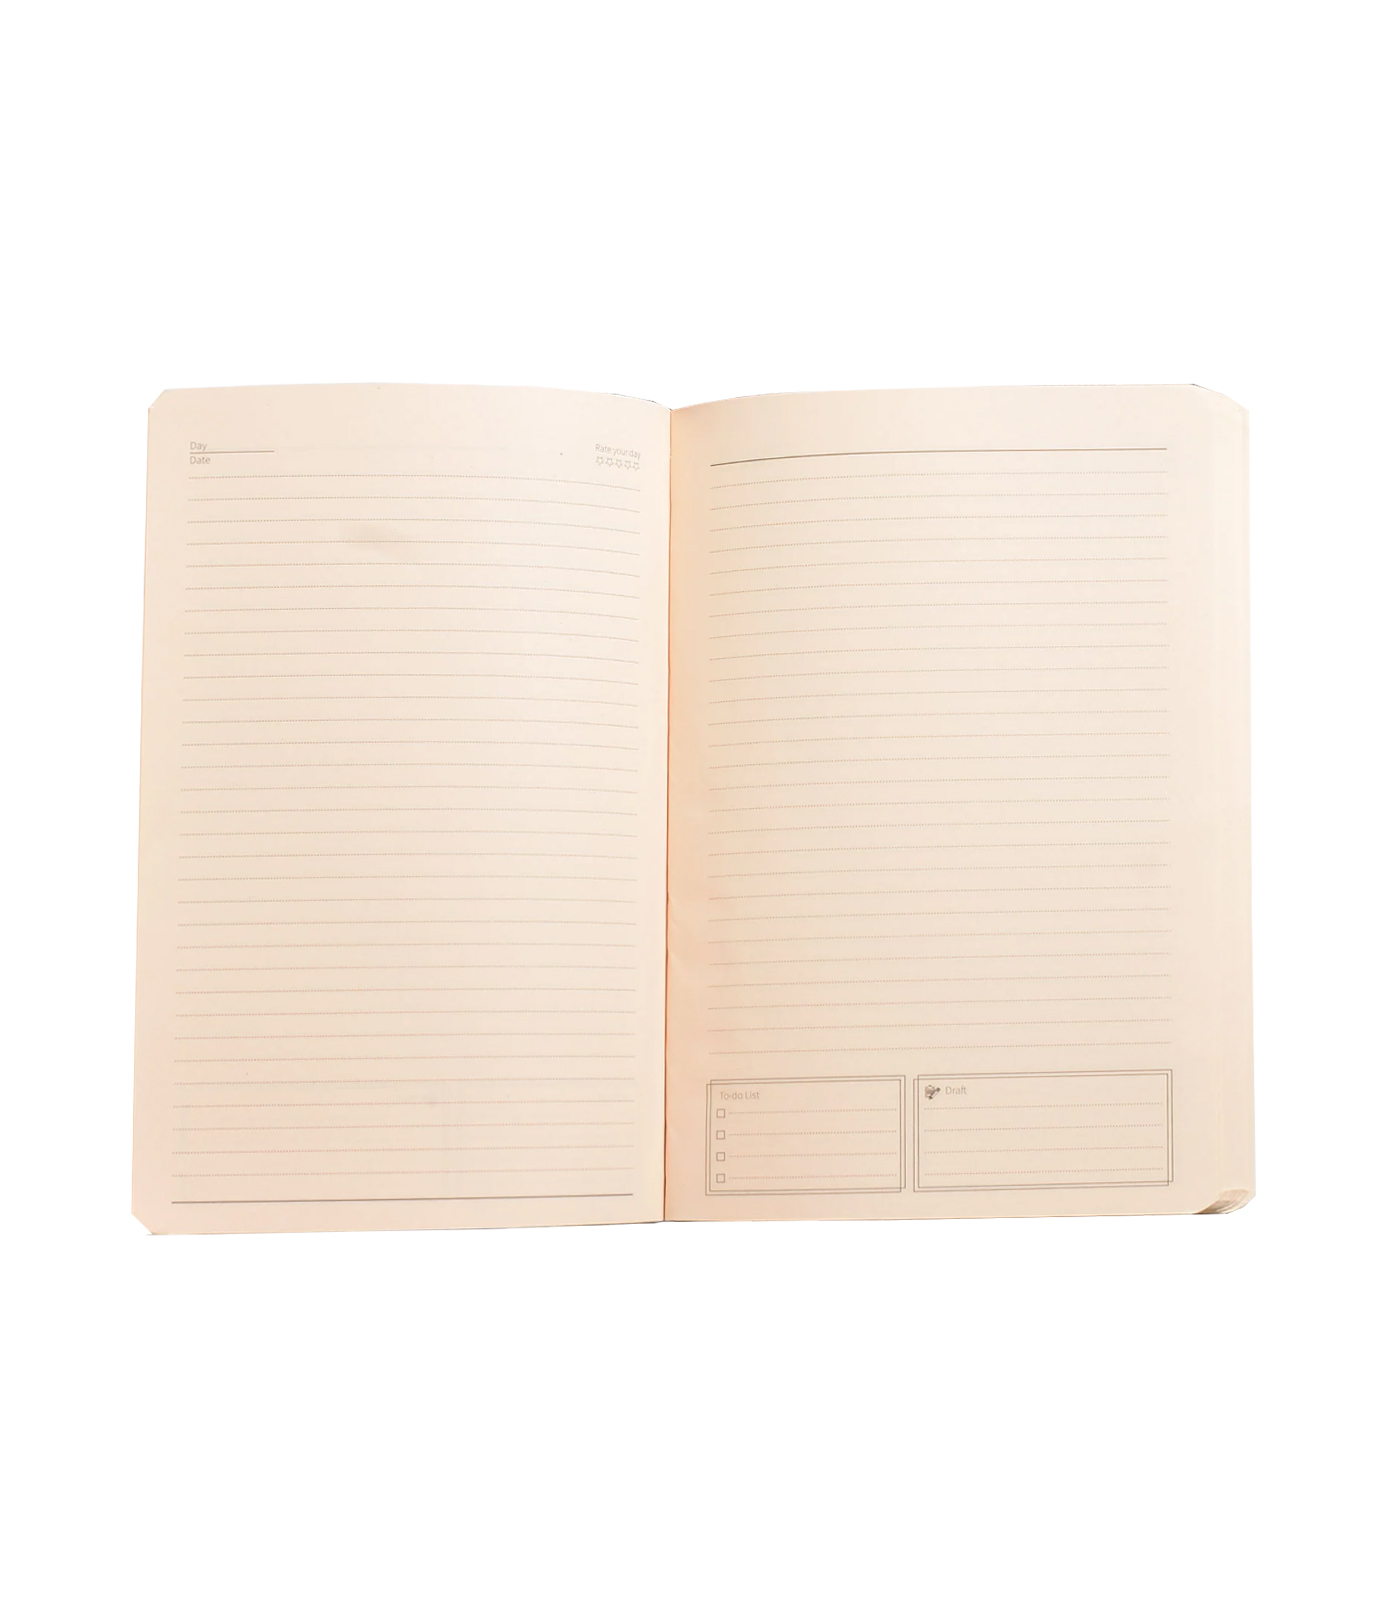 Atom Notebook Leather Cover - CRNB18